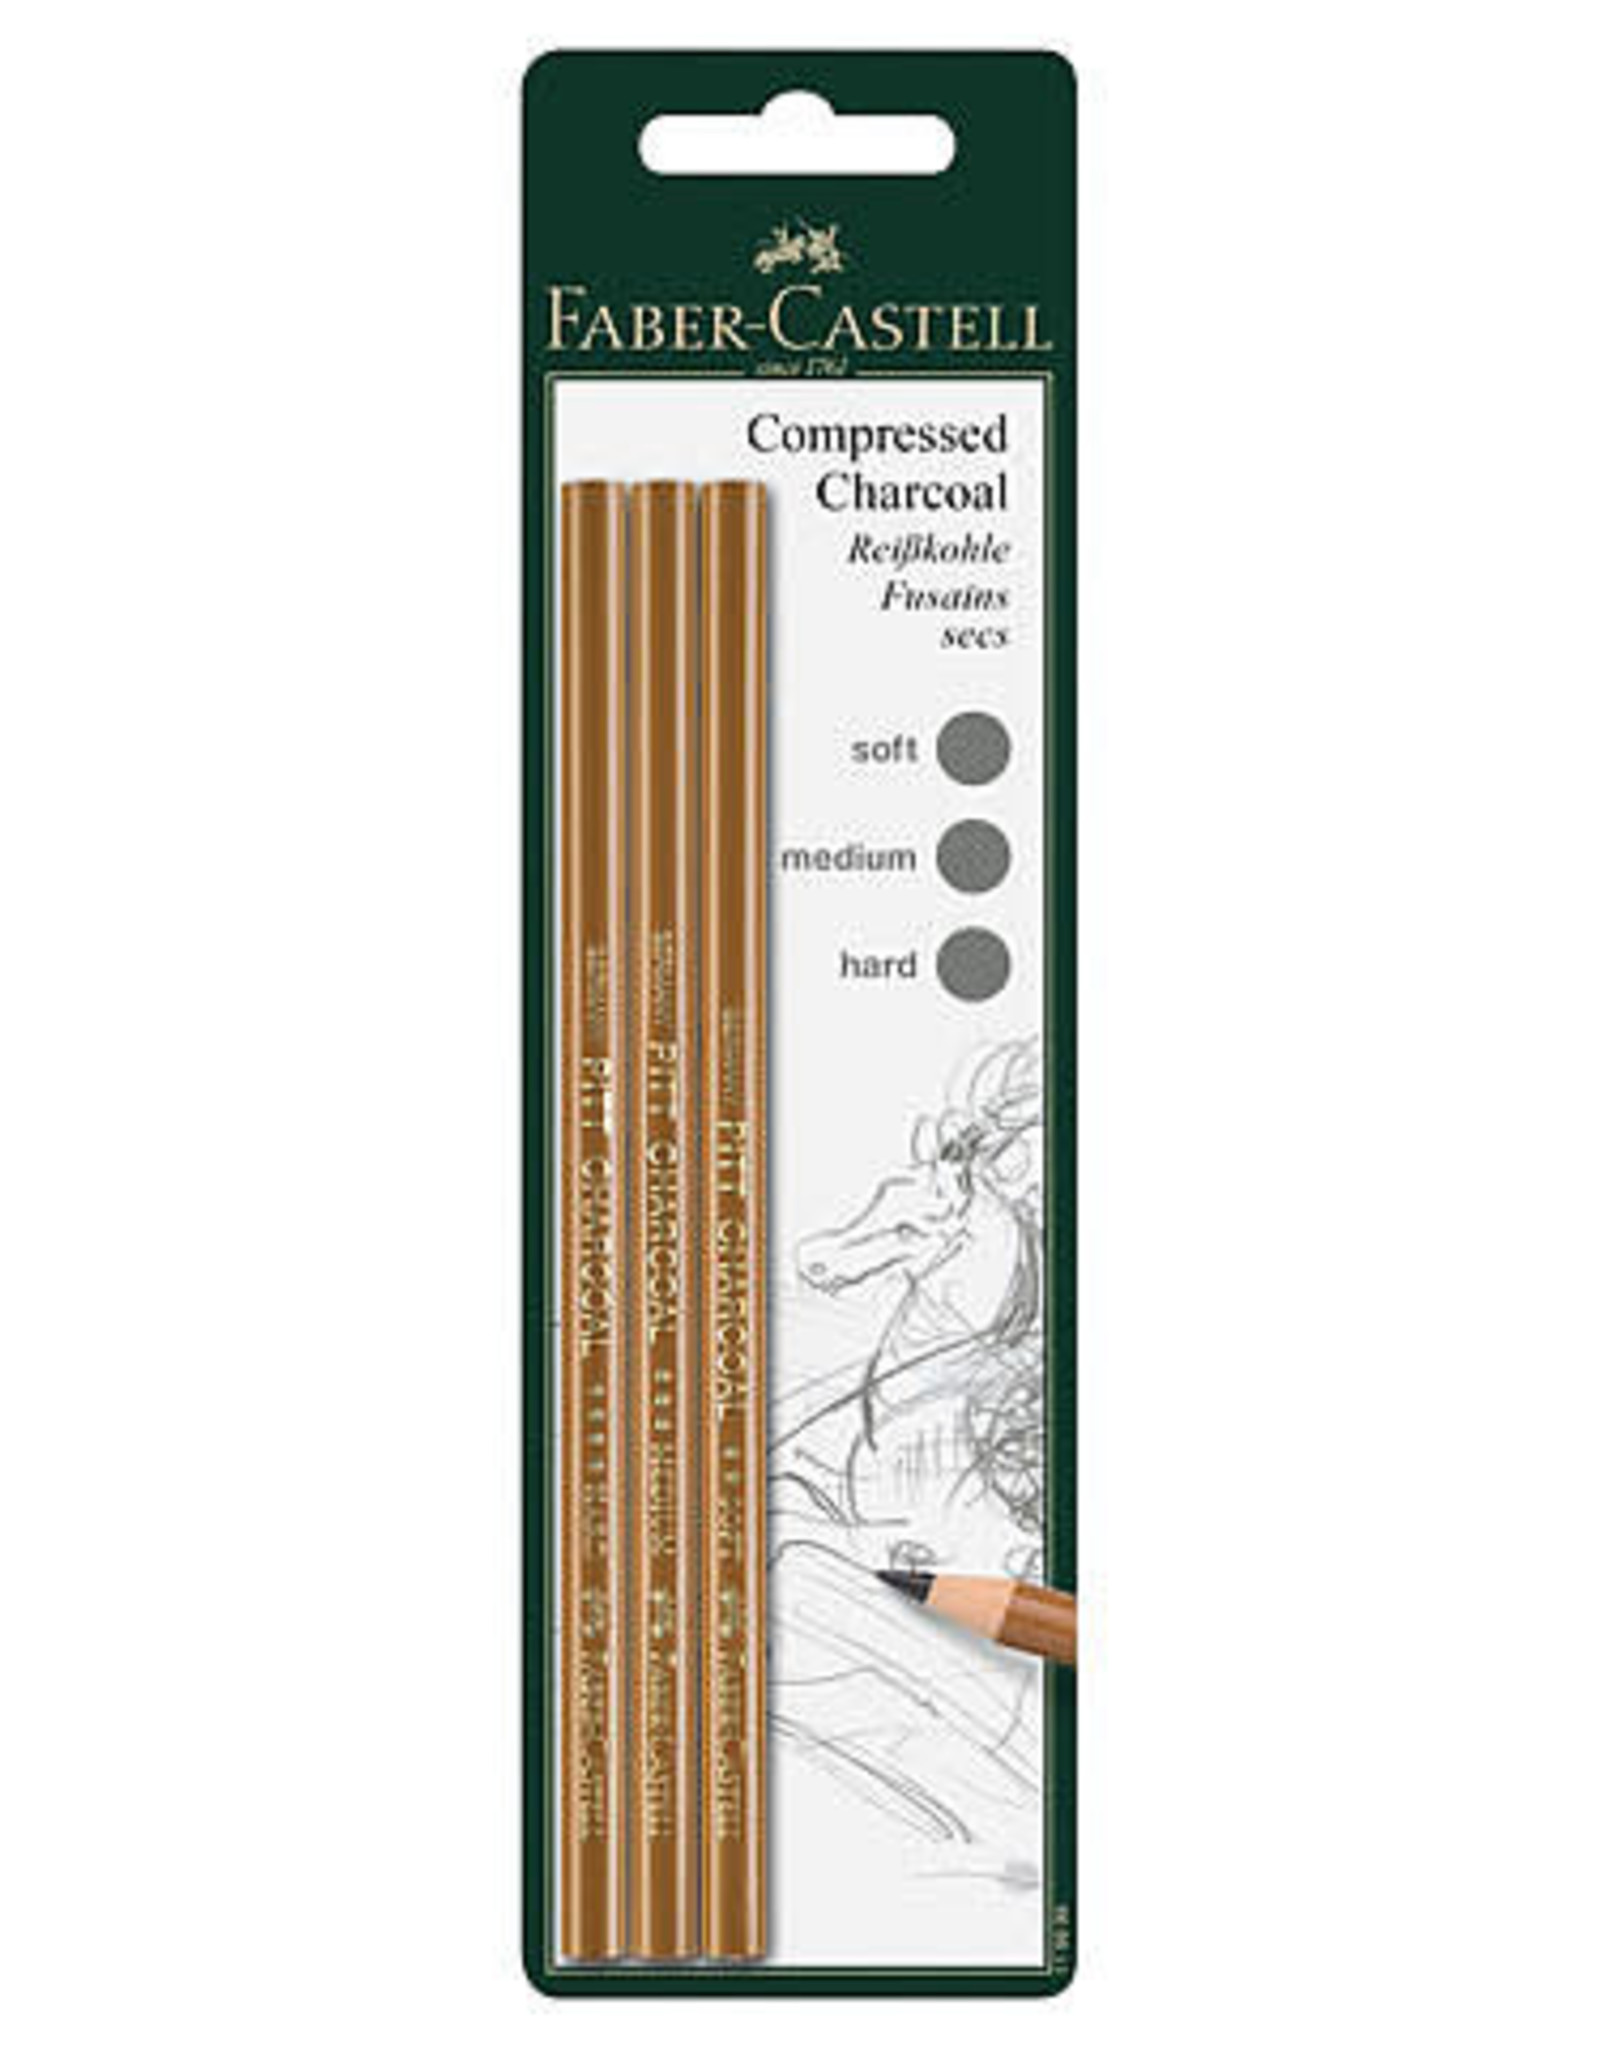 Faber-Castell PITT Compressed Charcoal Pencil Set